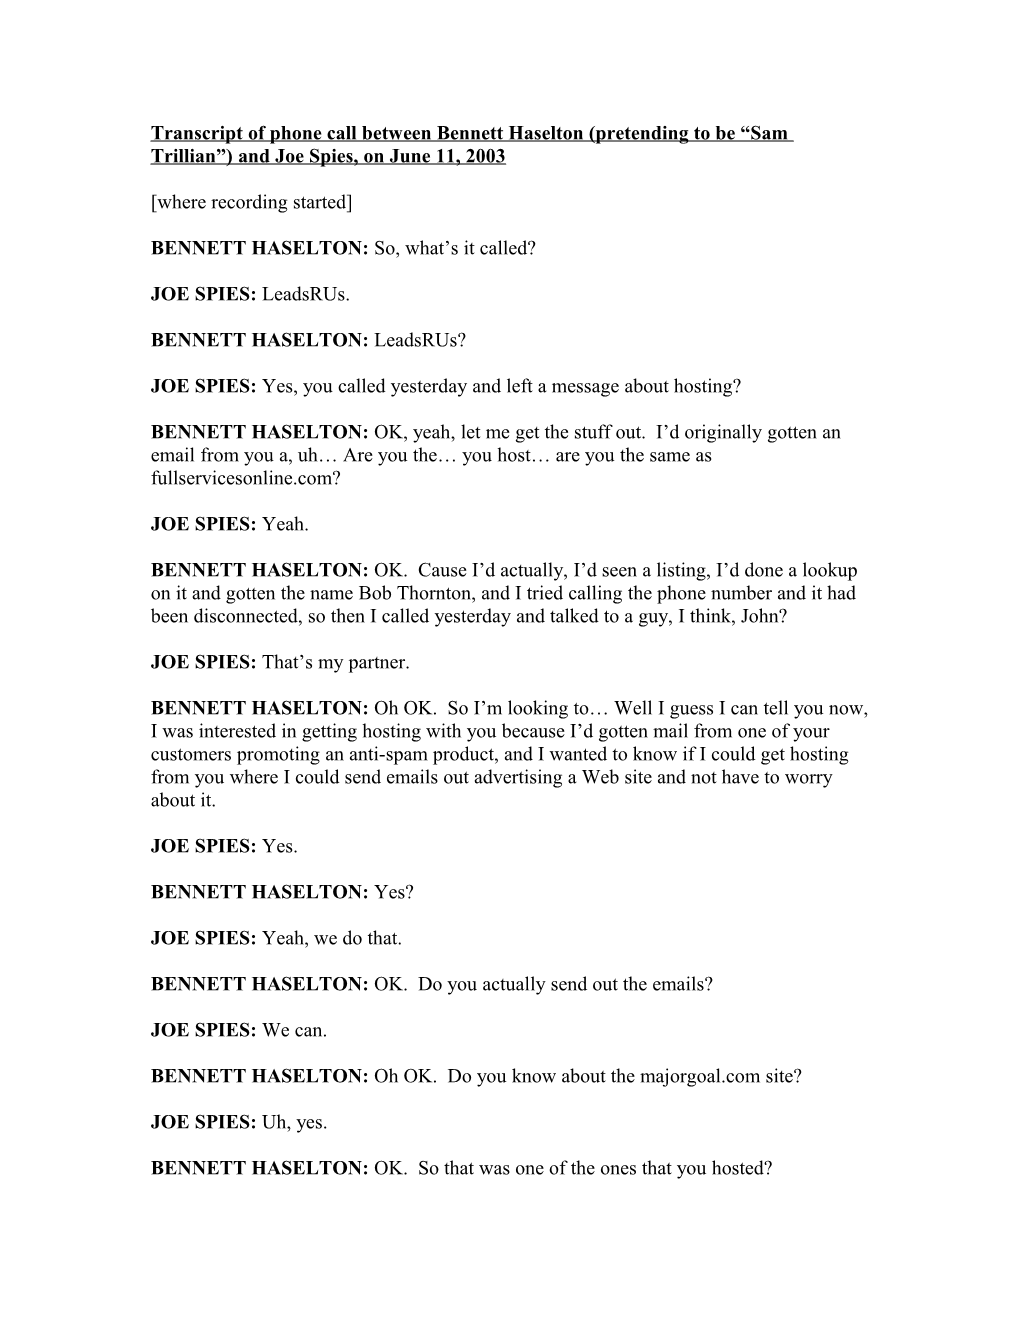 Transcript of Phone Call Between Bennett Haselton (Pretending to Be Sam Trillian ) And